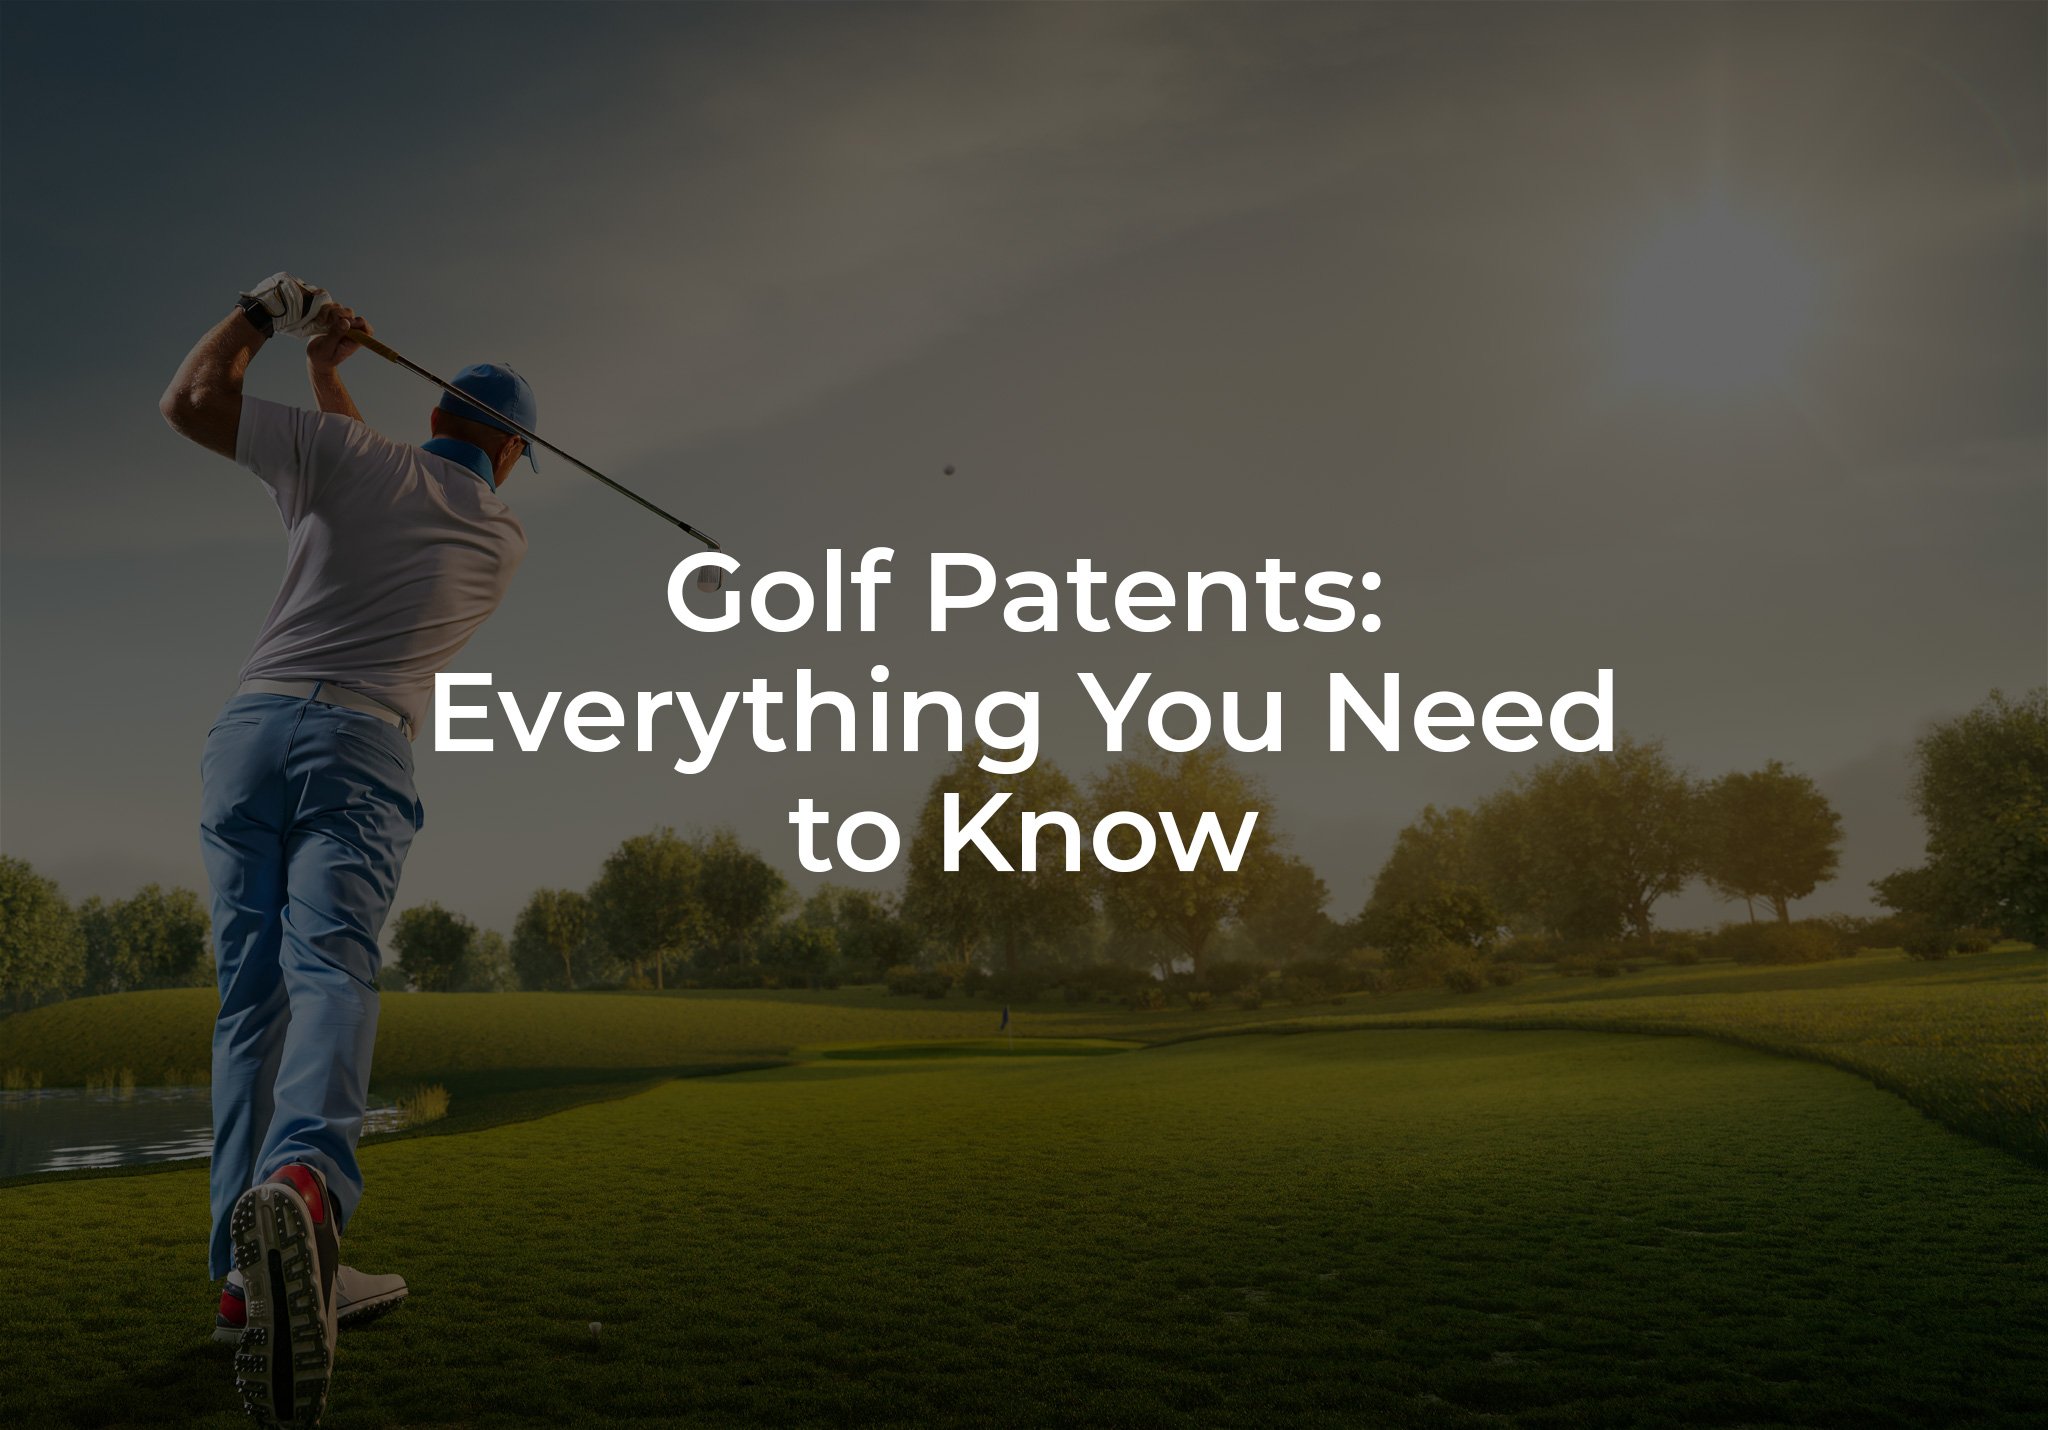 Golf Patents: Everything You Need to Know